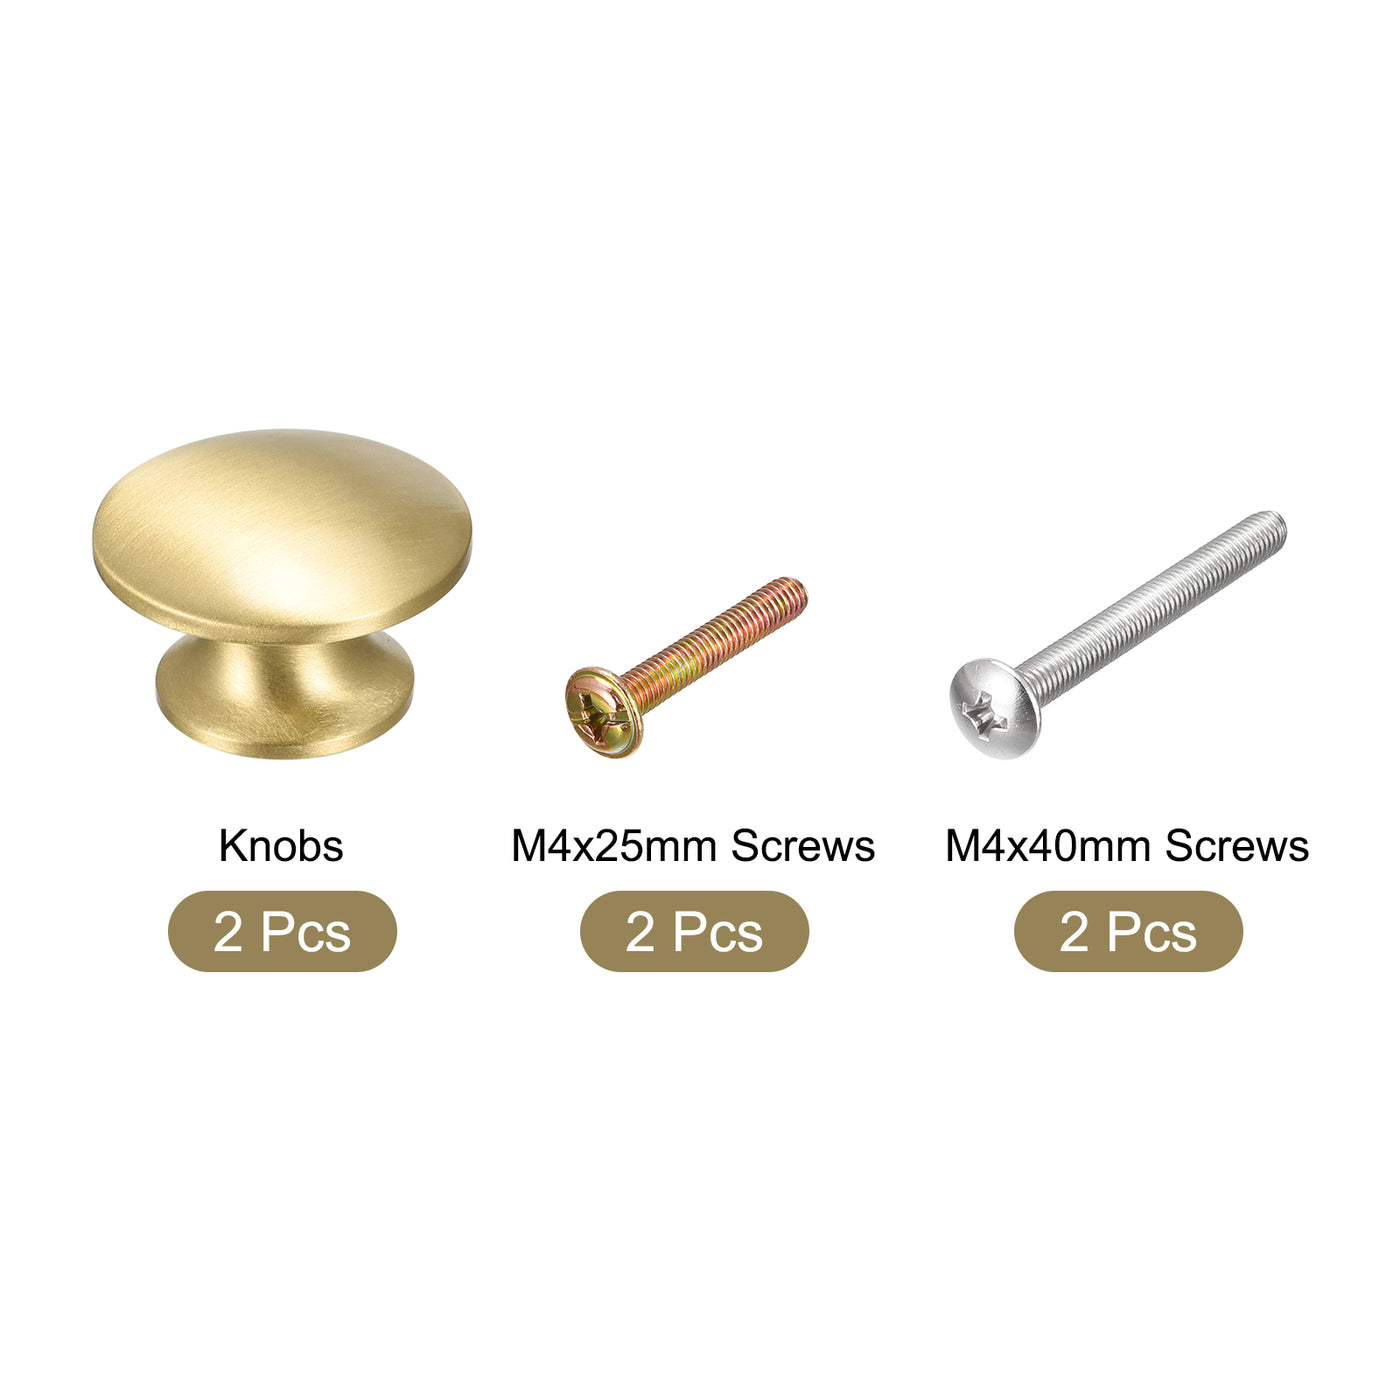 uxcell Uxcell 24x16mm Drawer Knobs, 2pcs Brass Wardrobe Door Pull Handles Gold Tone